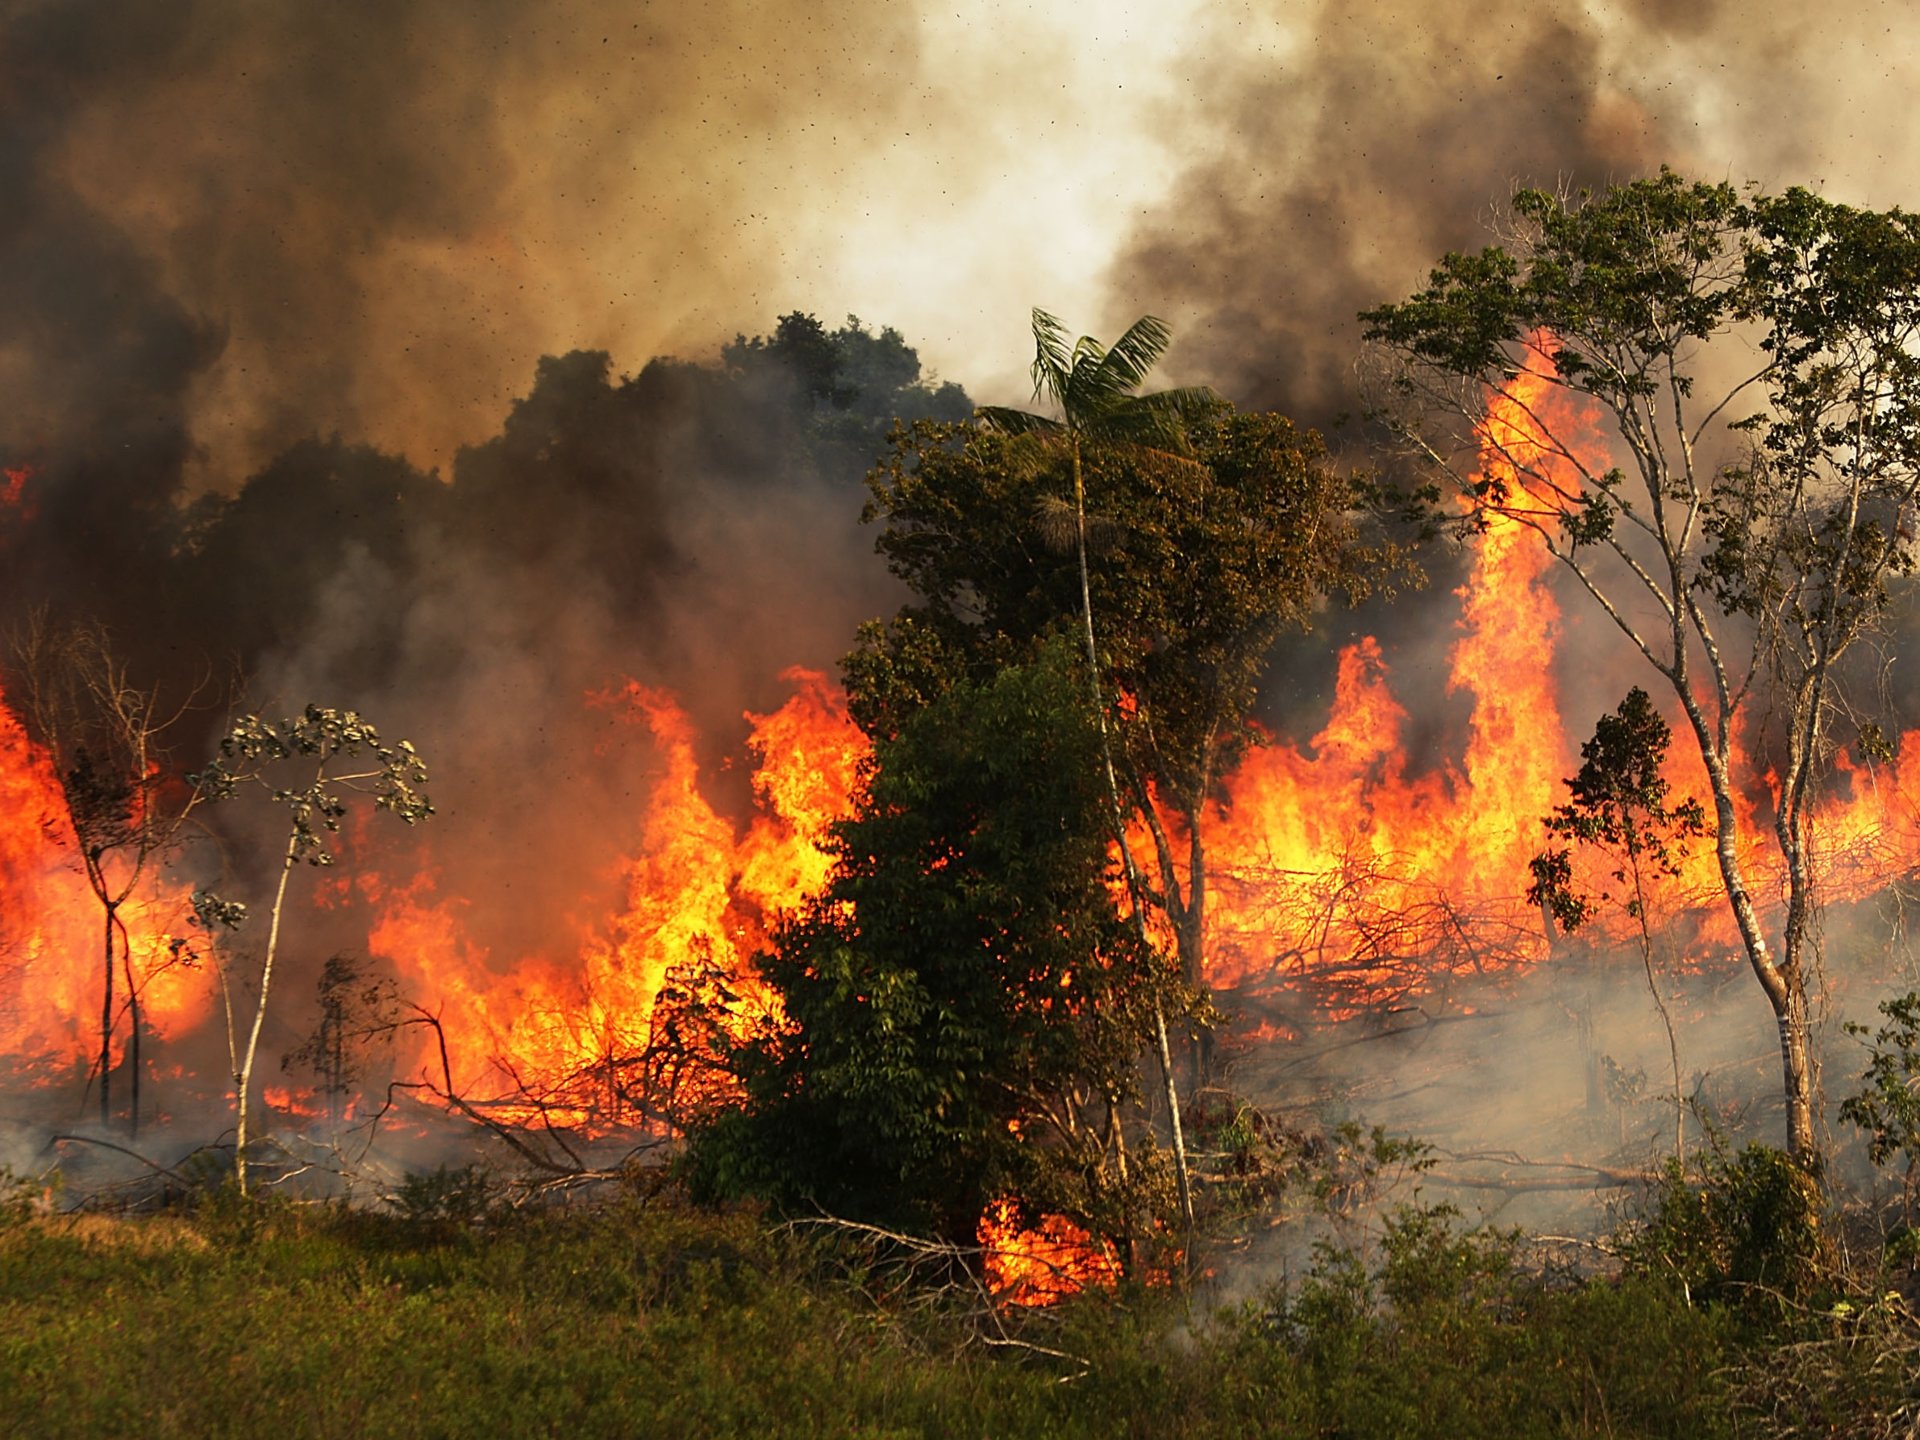 A fire burns along a highway in a deforested section of the Amazon basin on November 23, 2014 in Ze Doca, Brazil.